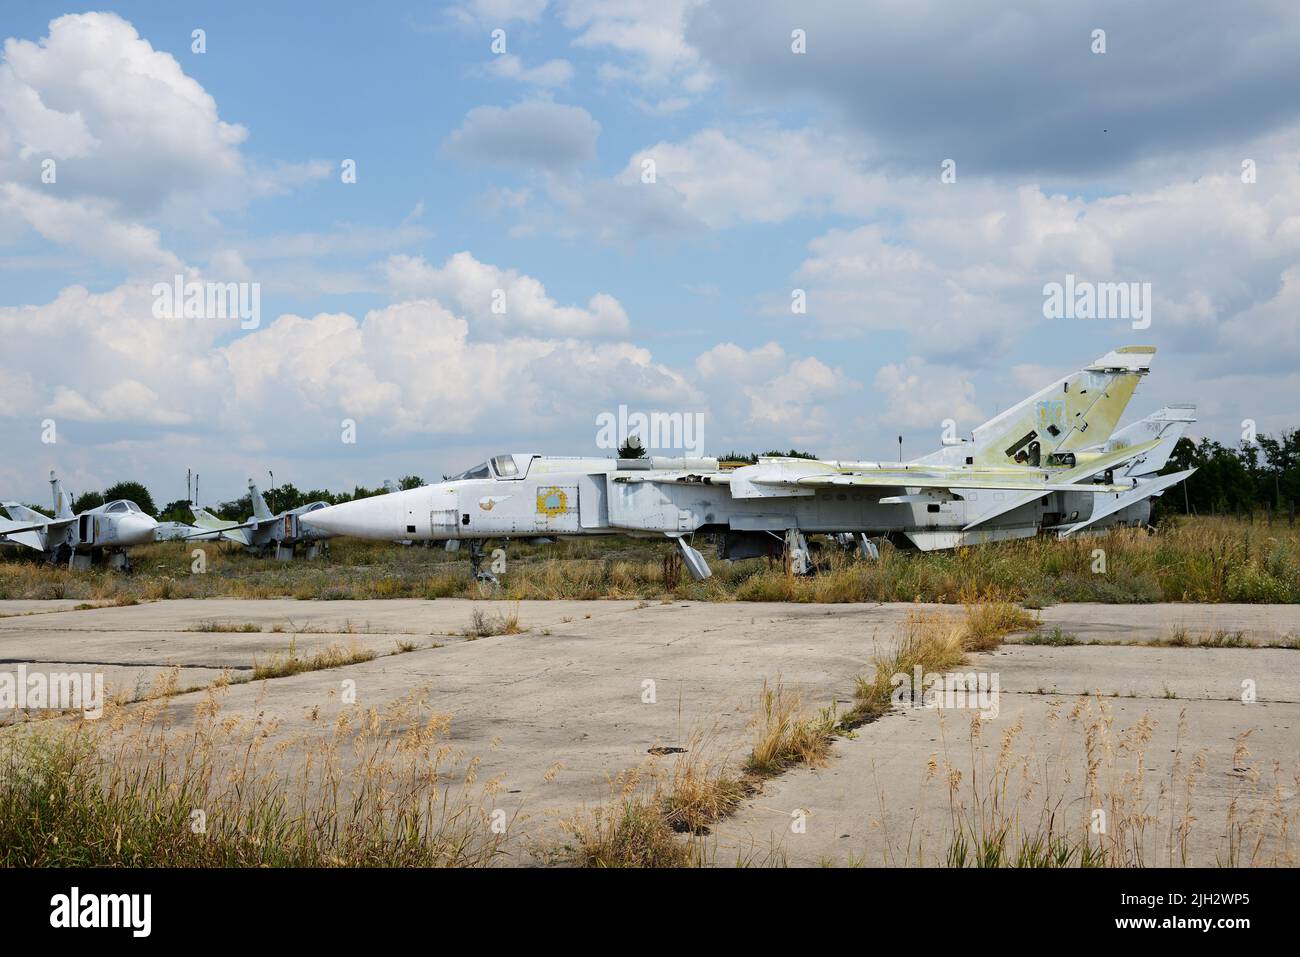 BILA TSERKVA, UKRAINE - AUGUST 25: The view on disassembled Ukrainian Sukhoi Su-24 supersonic all-weather attack aircraft on August 25, 2021 in Bila T Stock Photo